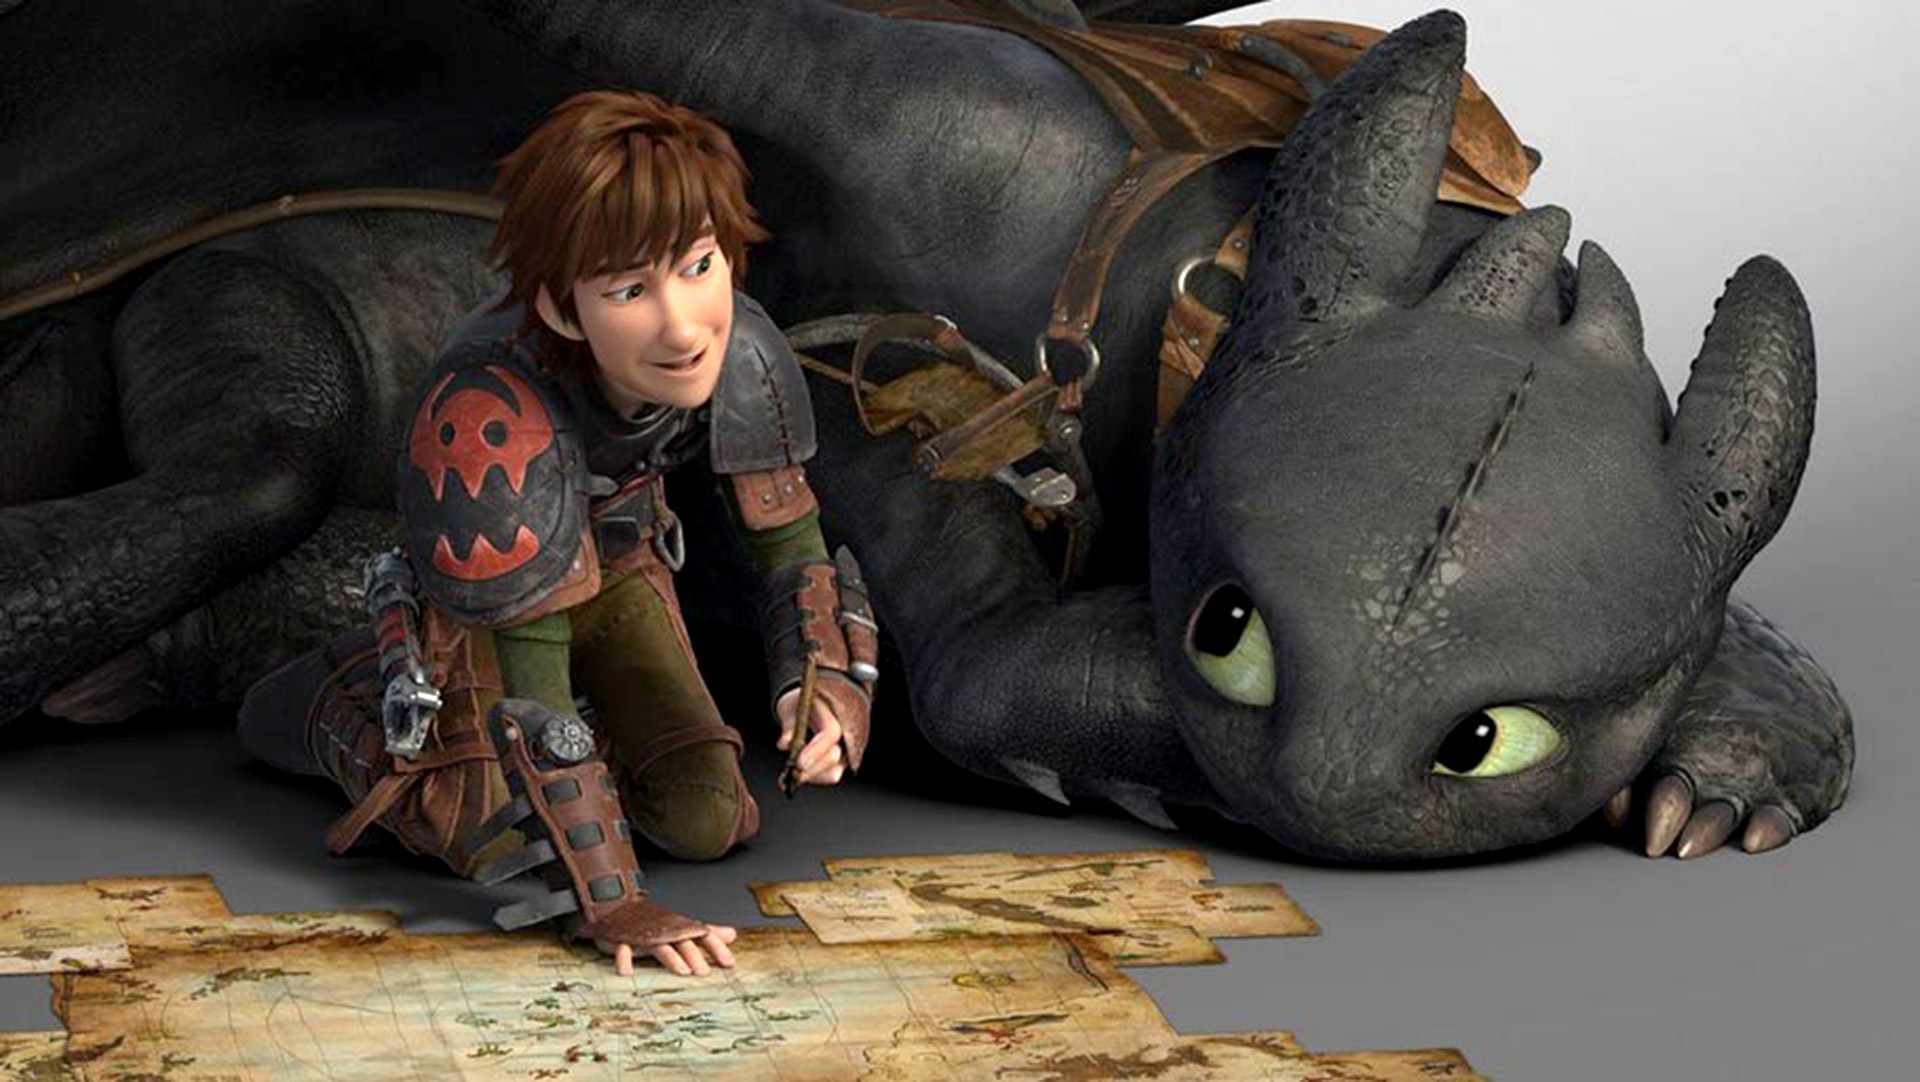 How To Train Your Dragon 2 Wallpaper Hd Toothless Hiccup